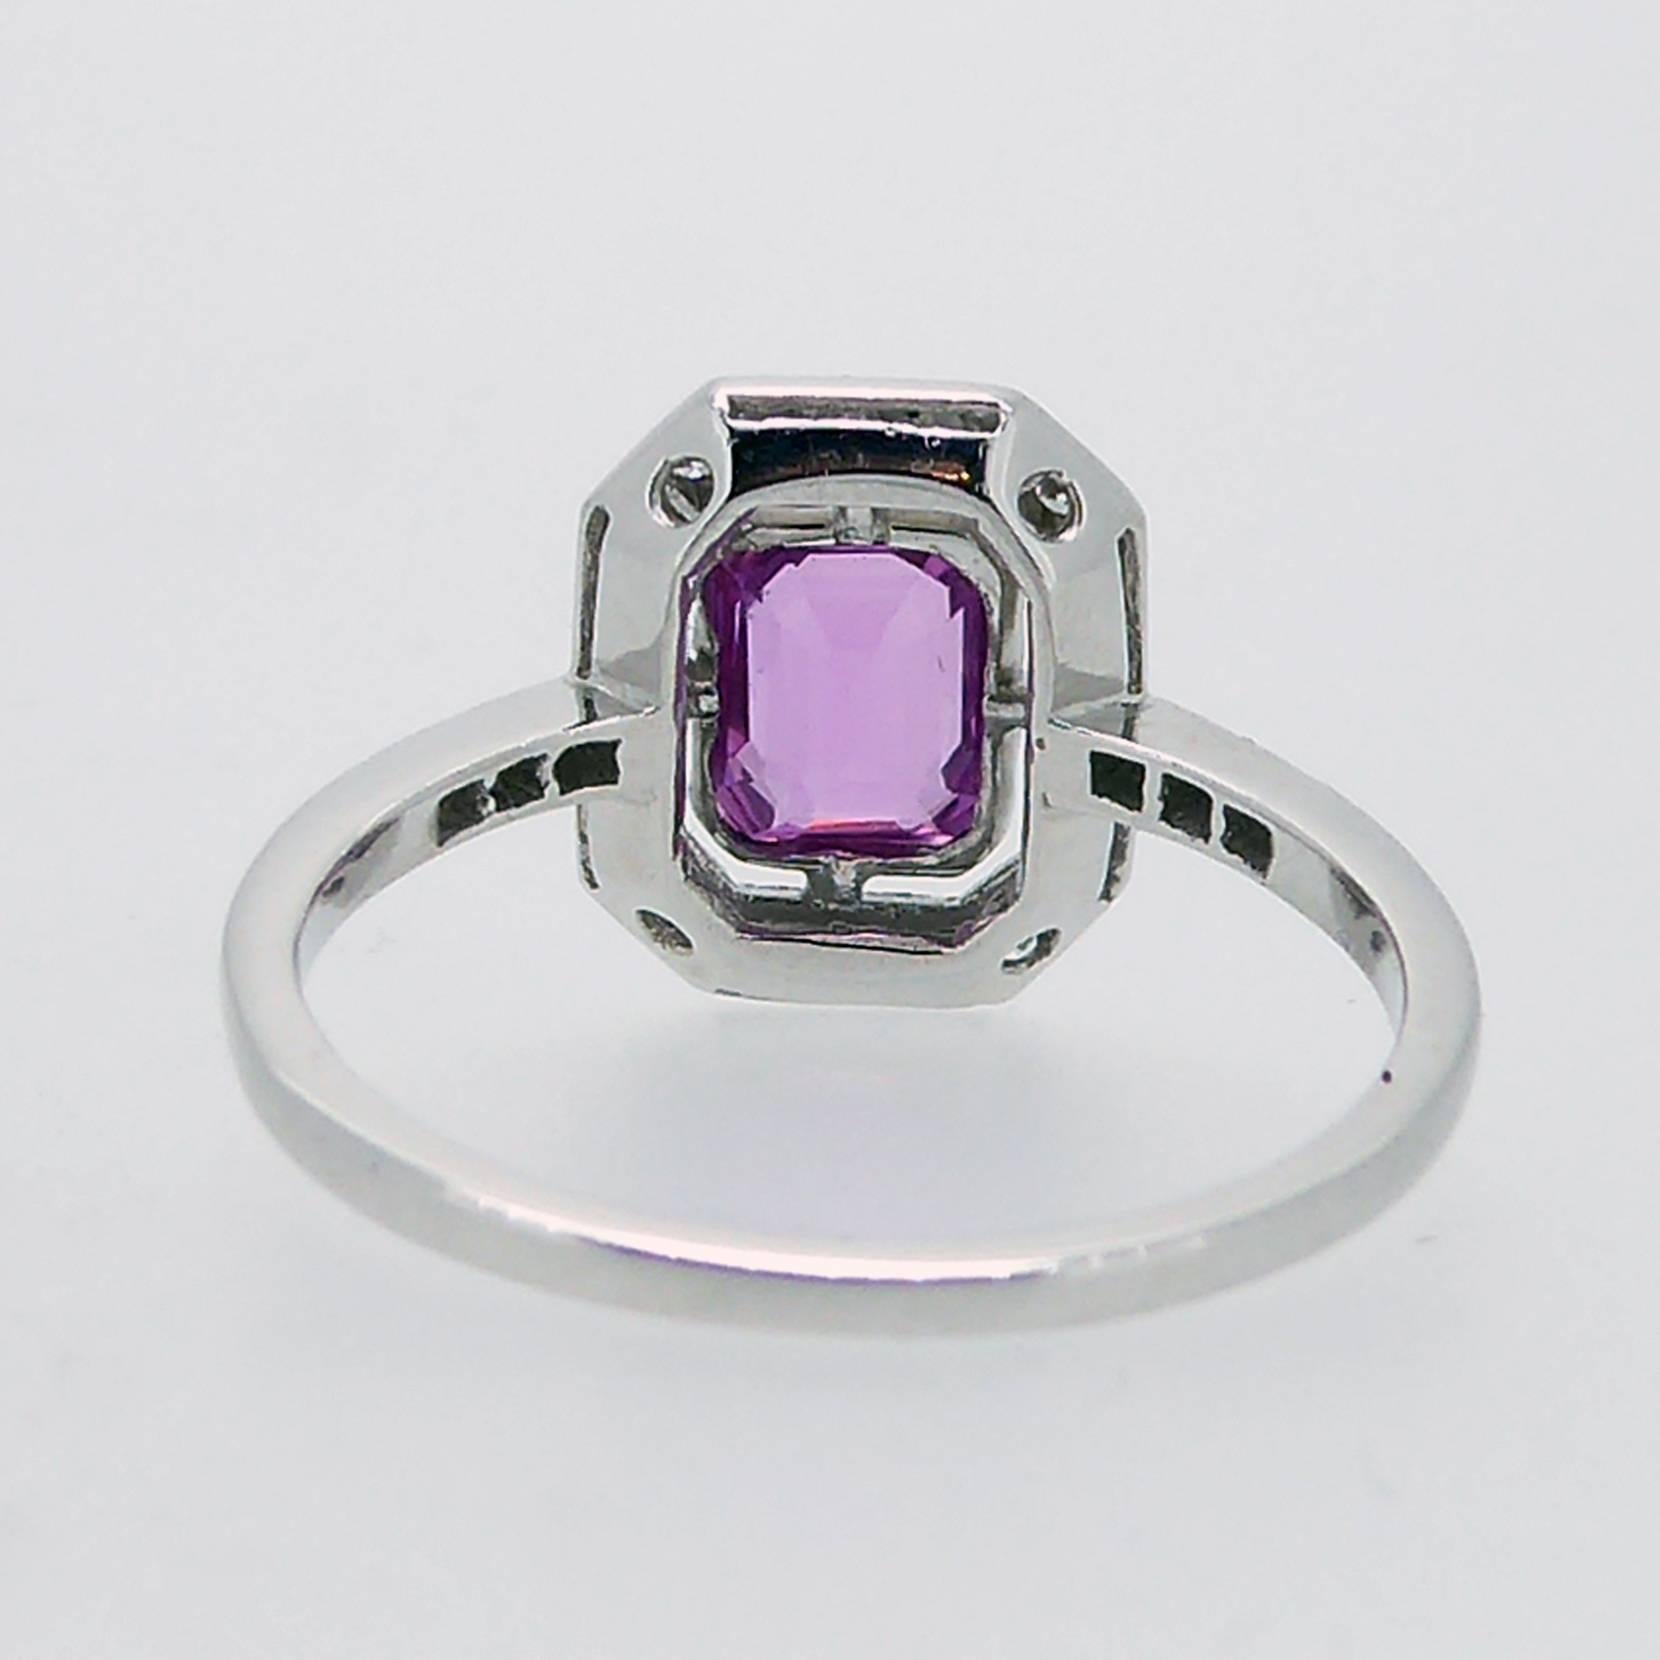 1.05 Carat Pink Sapphire and Diamond Vintage Cluster Ring, 18 Carat White Gold 1